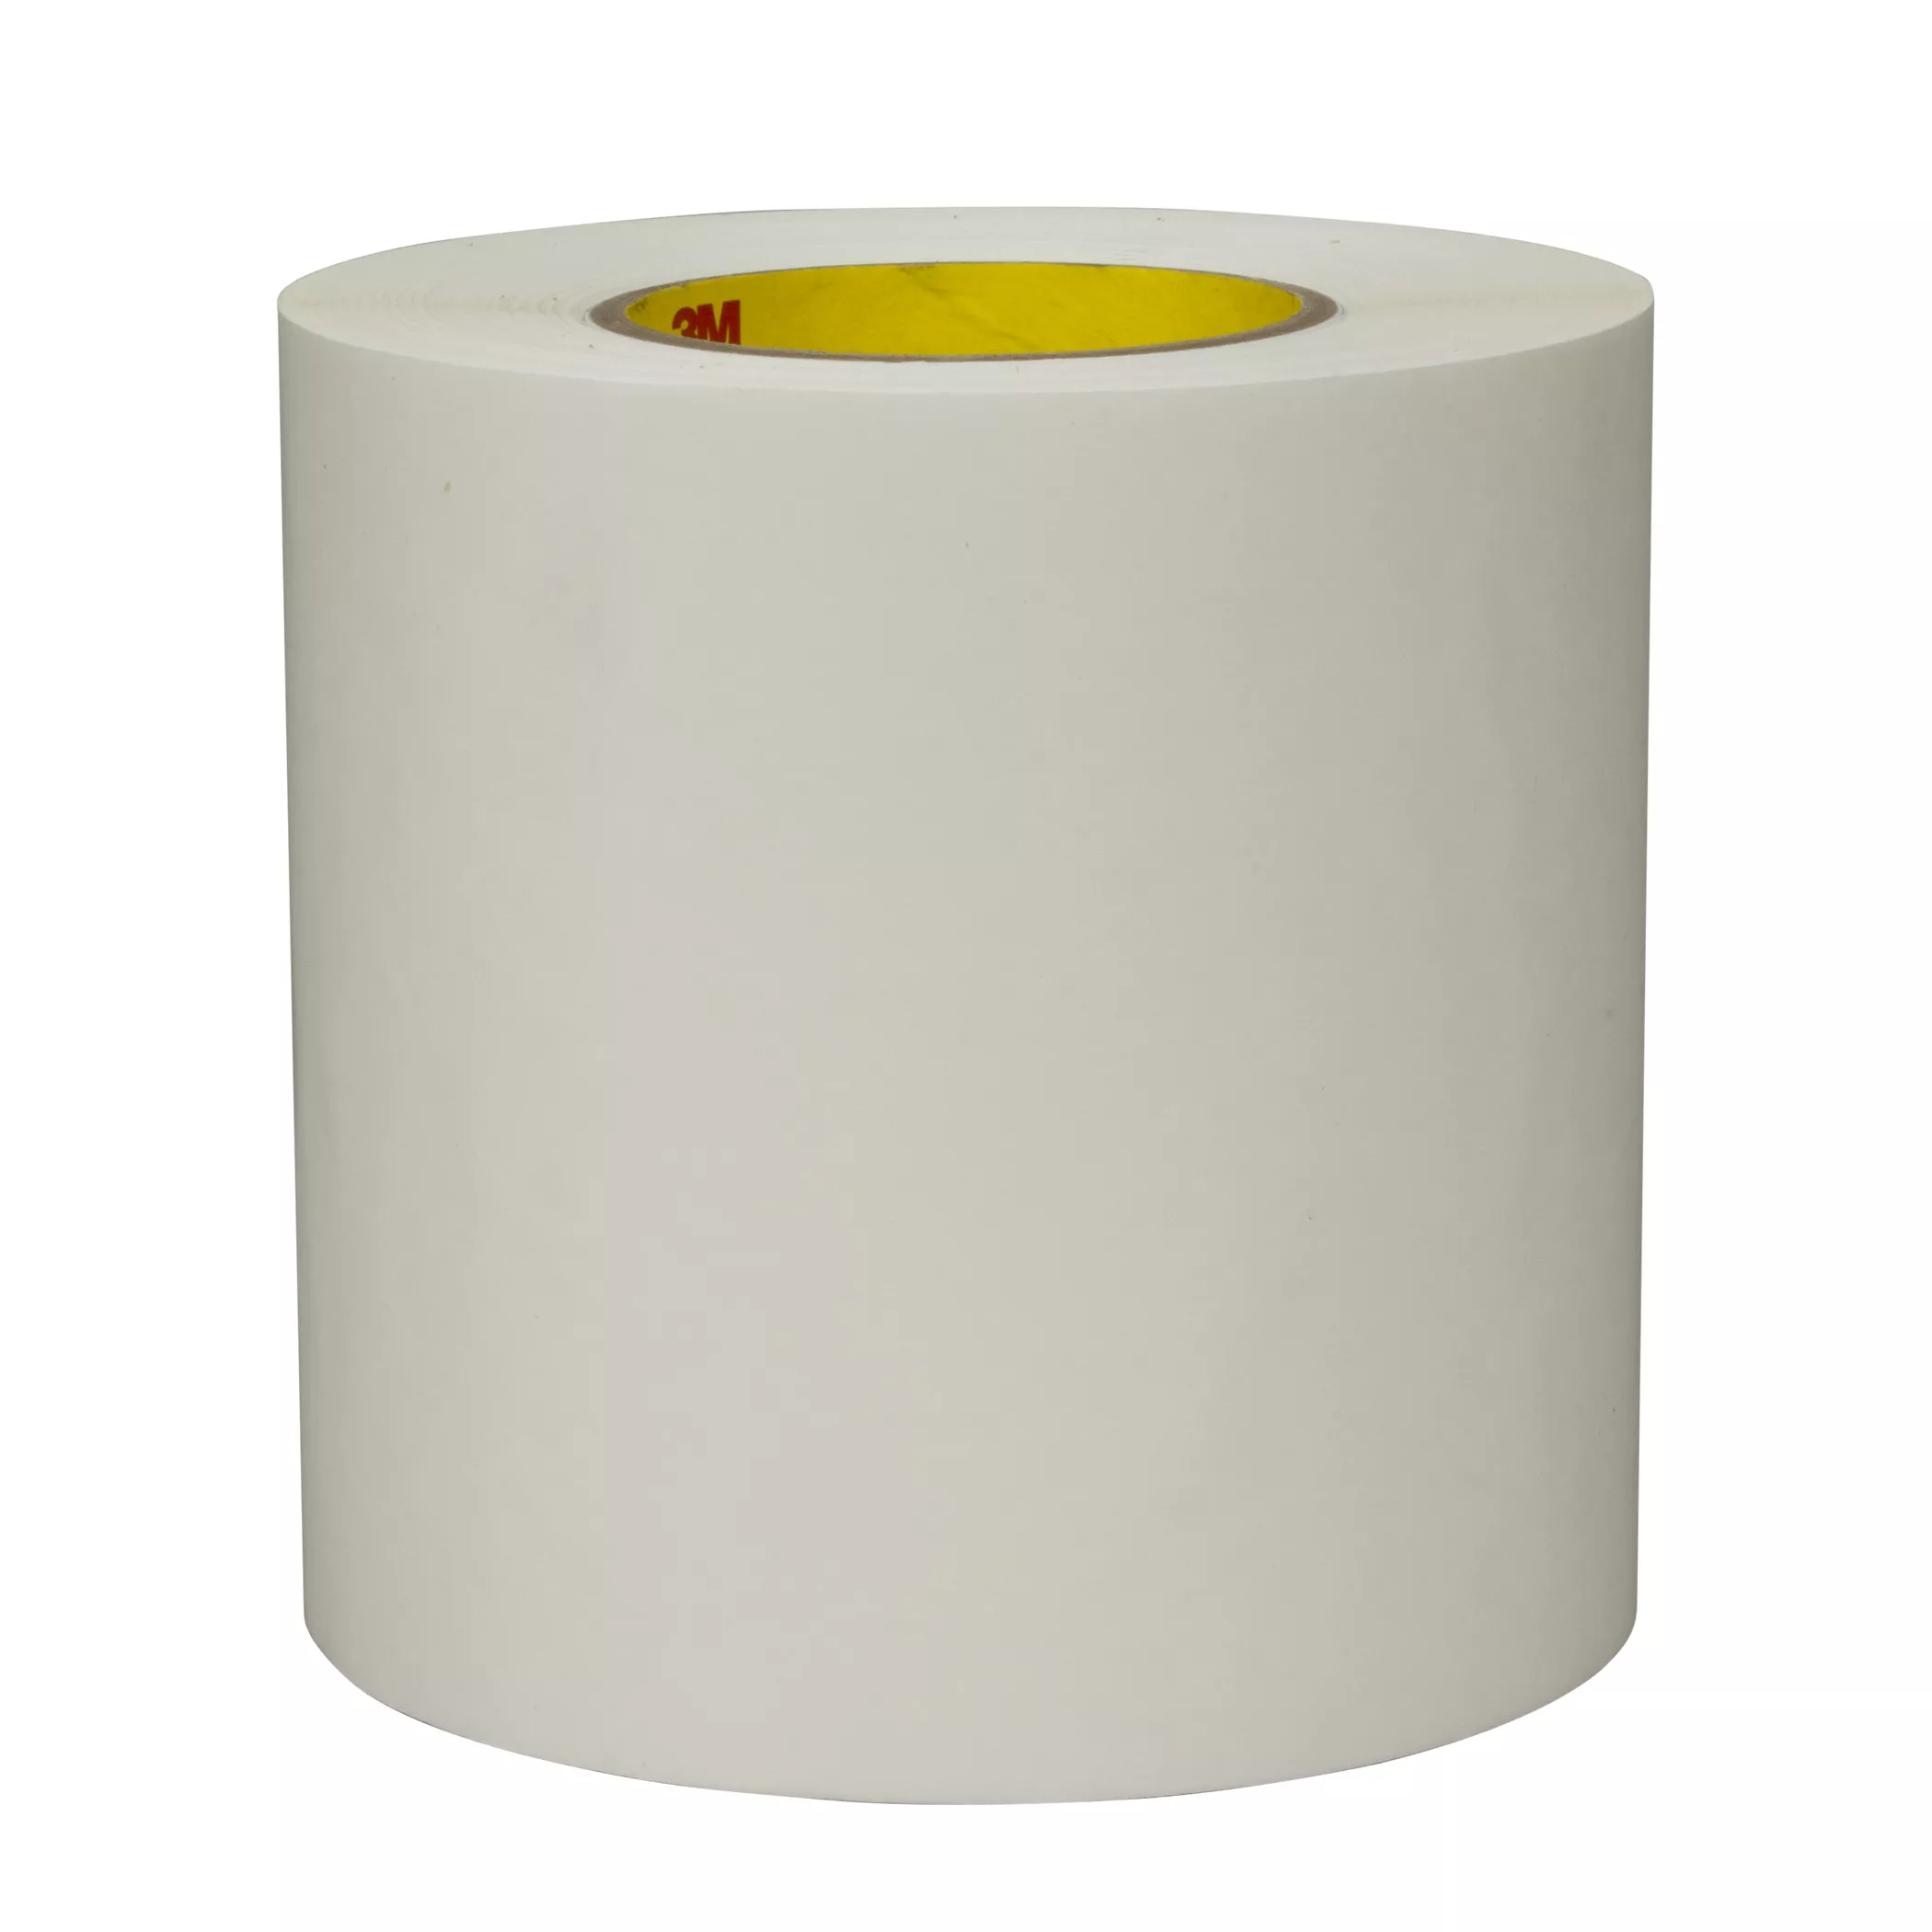 3M™ Double Coated Tape 9443NP, Clear, 1 in x 60 yd, 6 mil, 36 Roll/Case